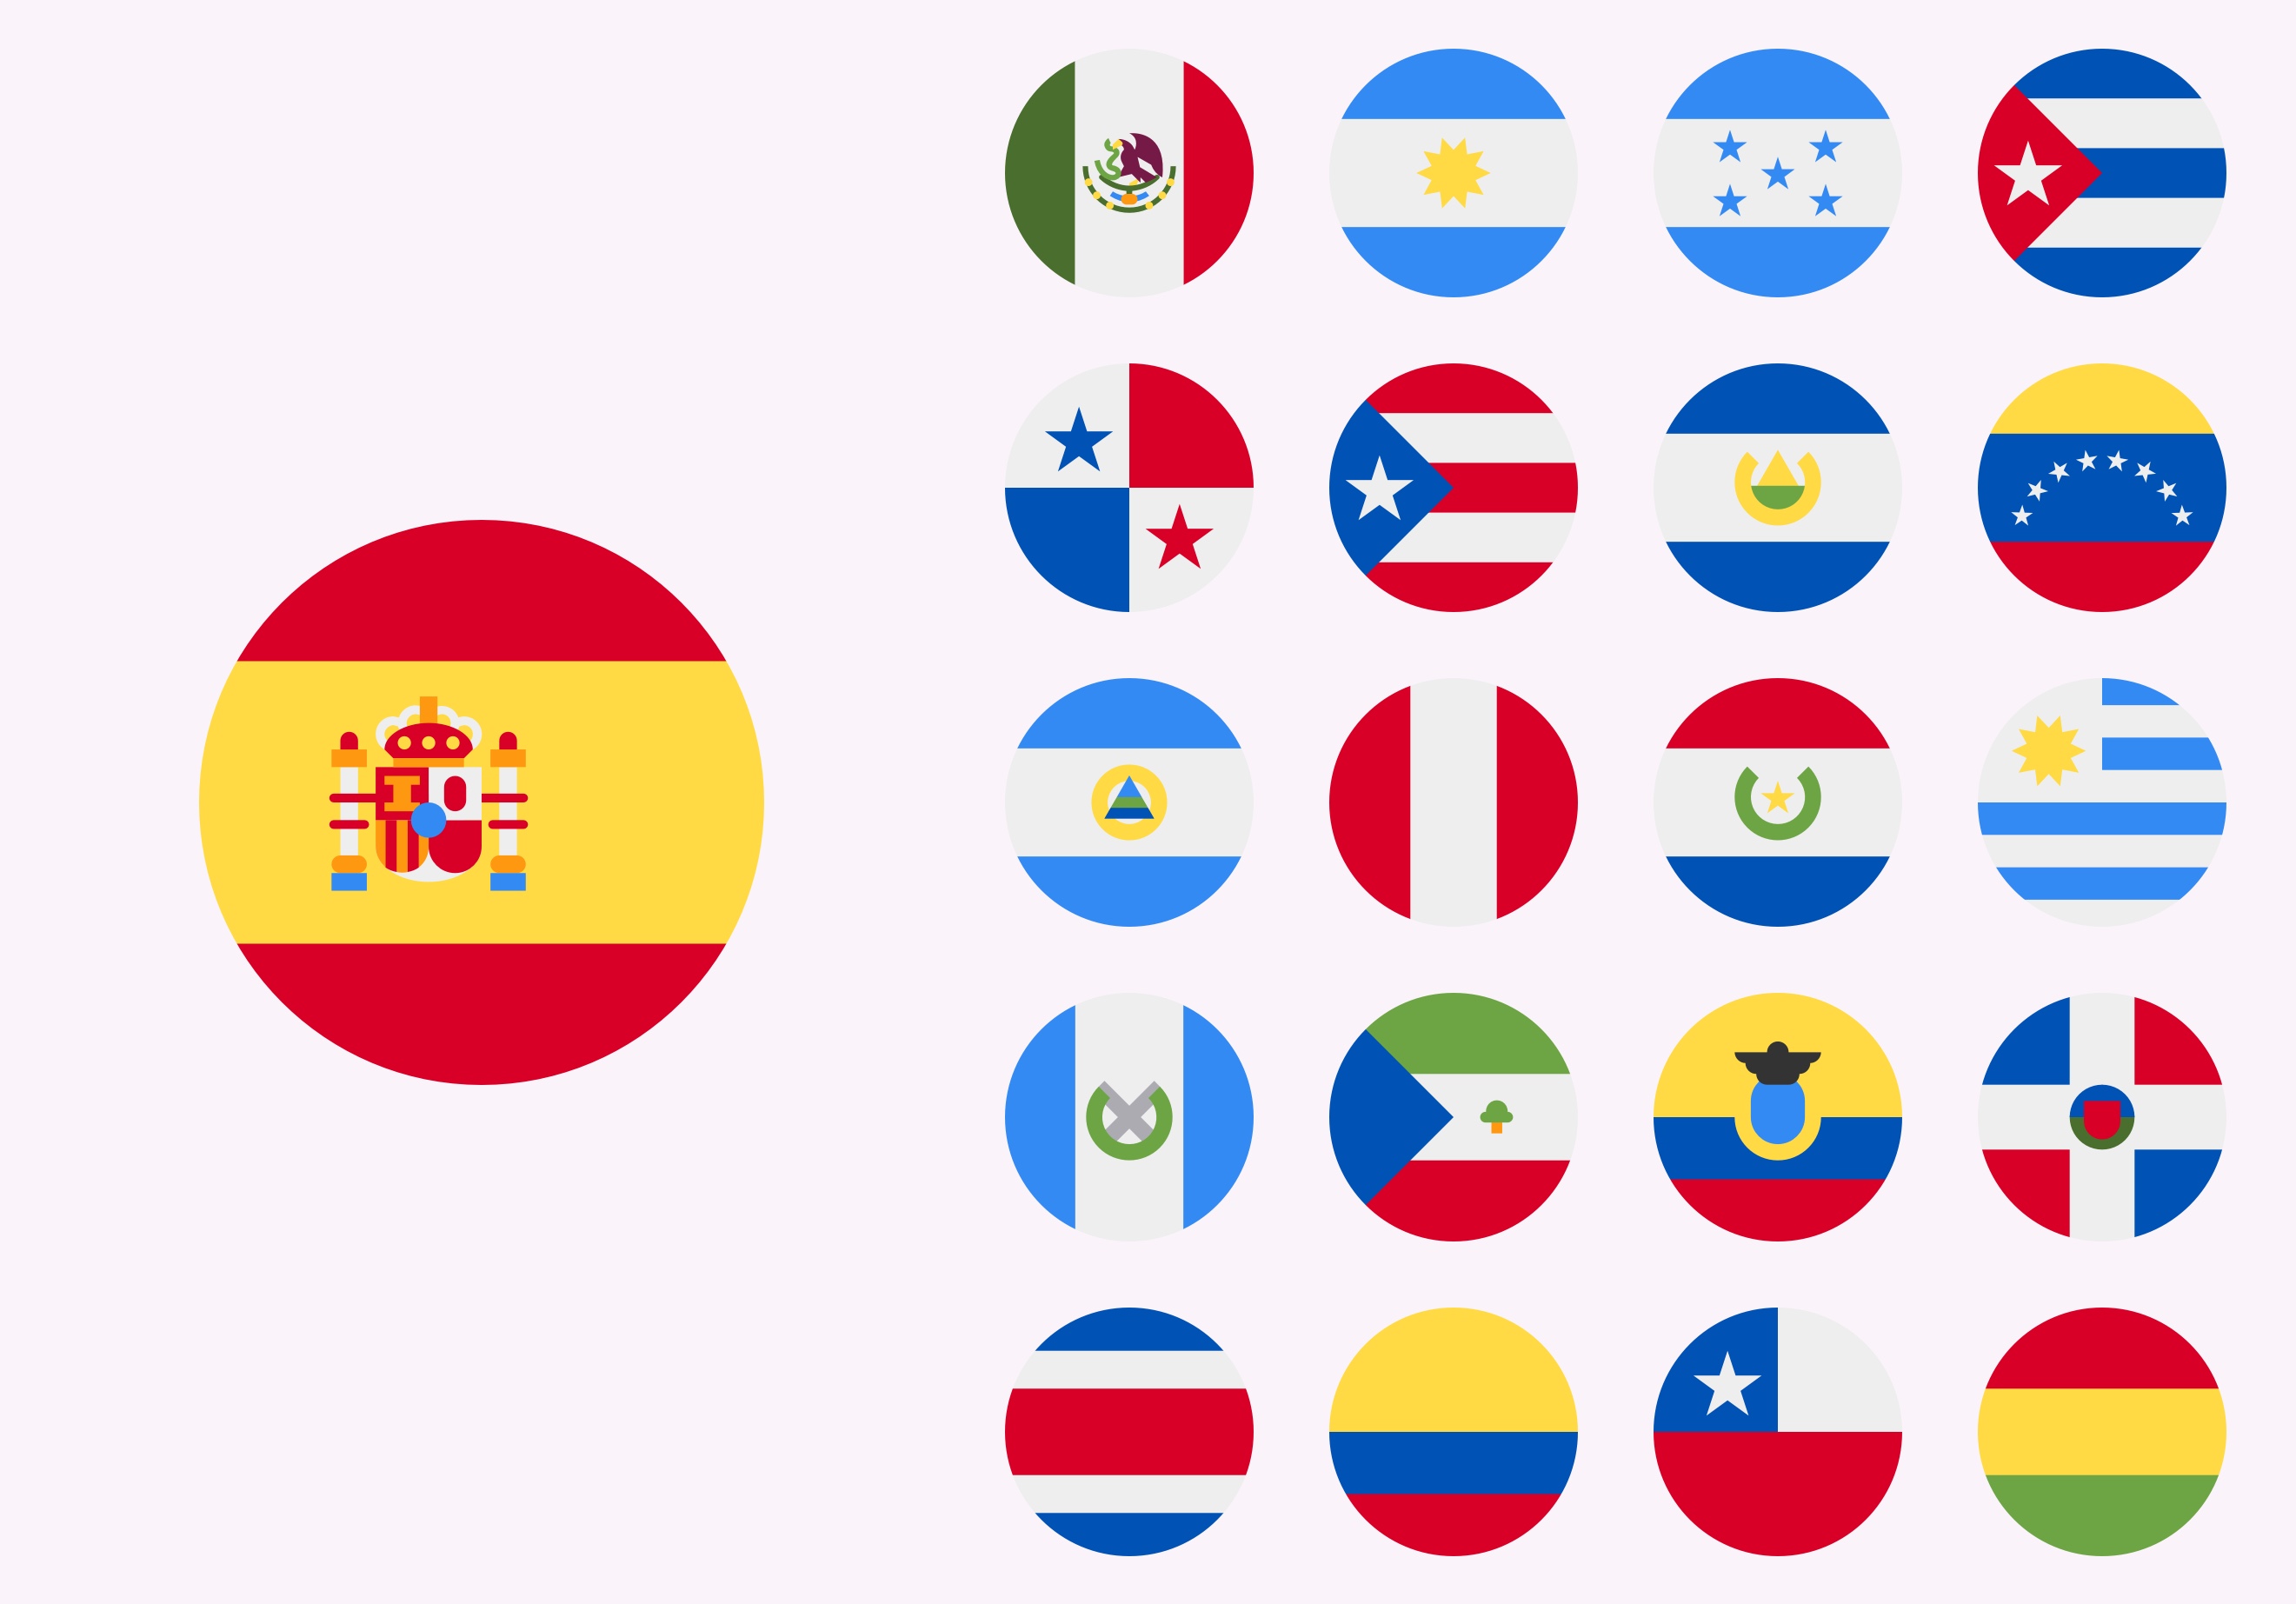 Image showing different countries with Spanish language / flag